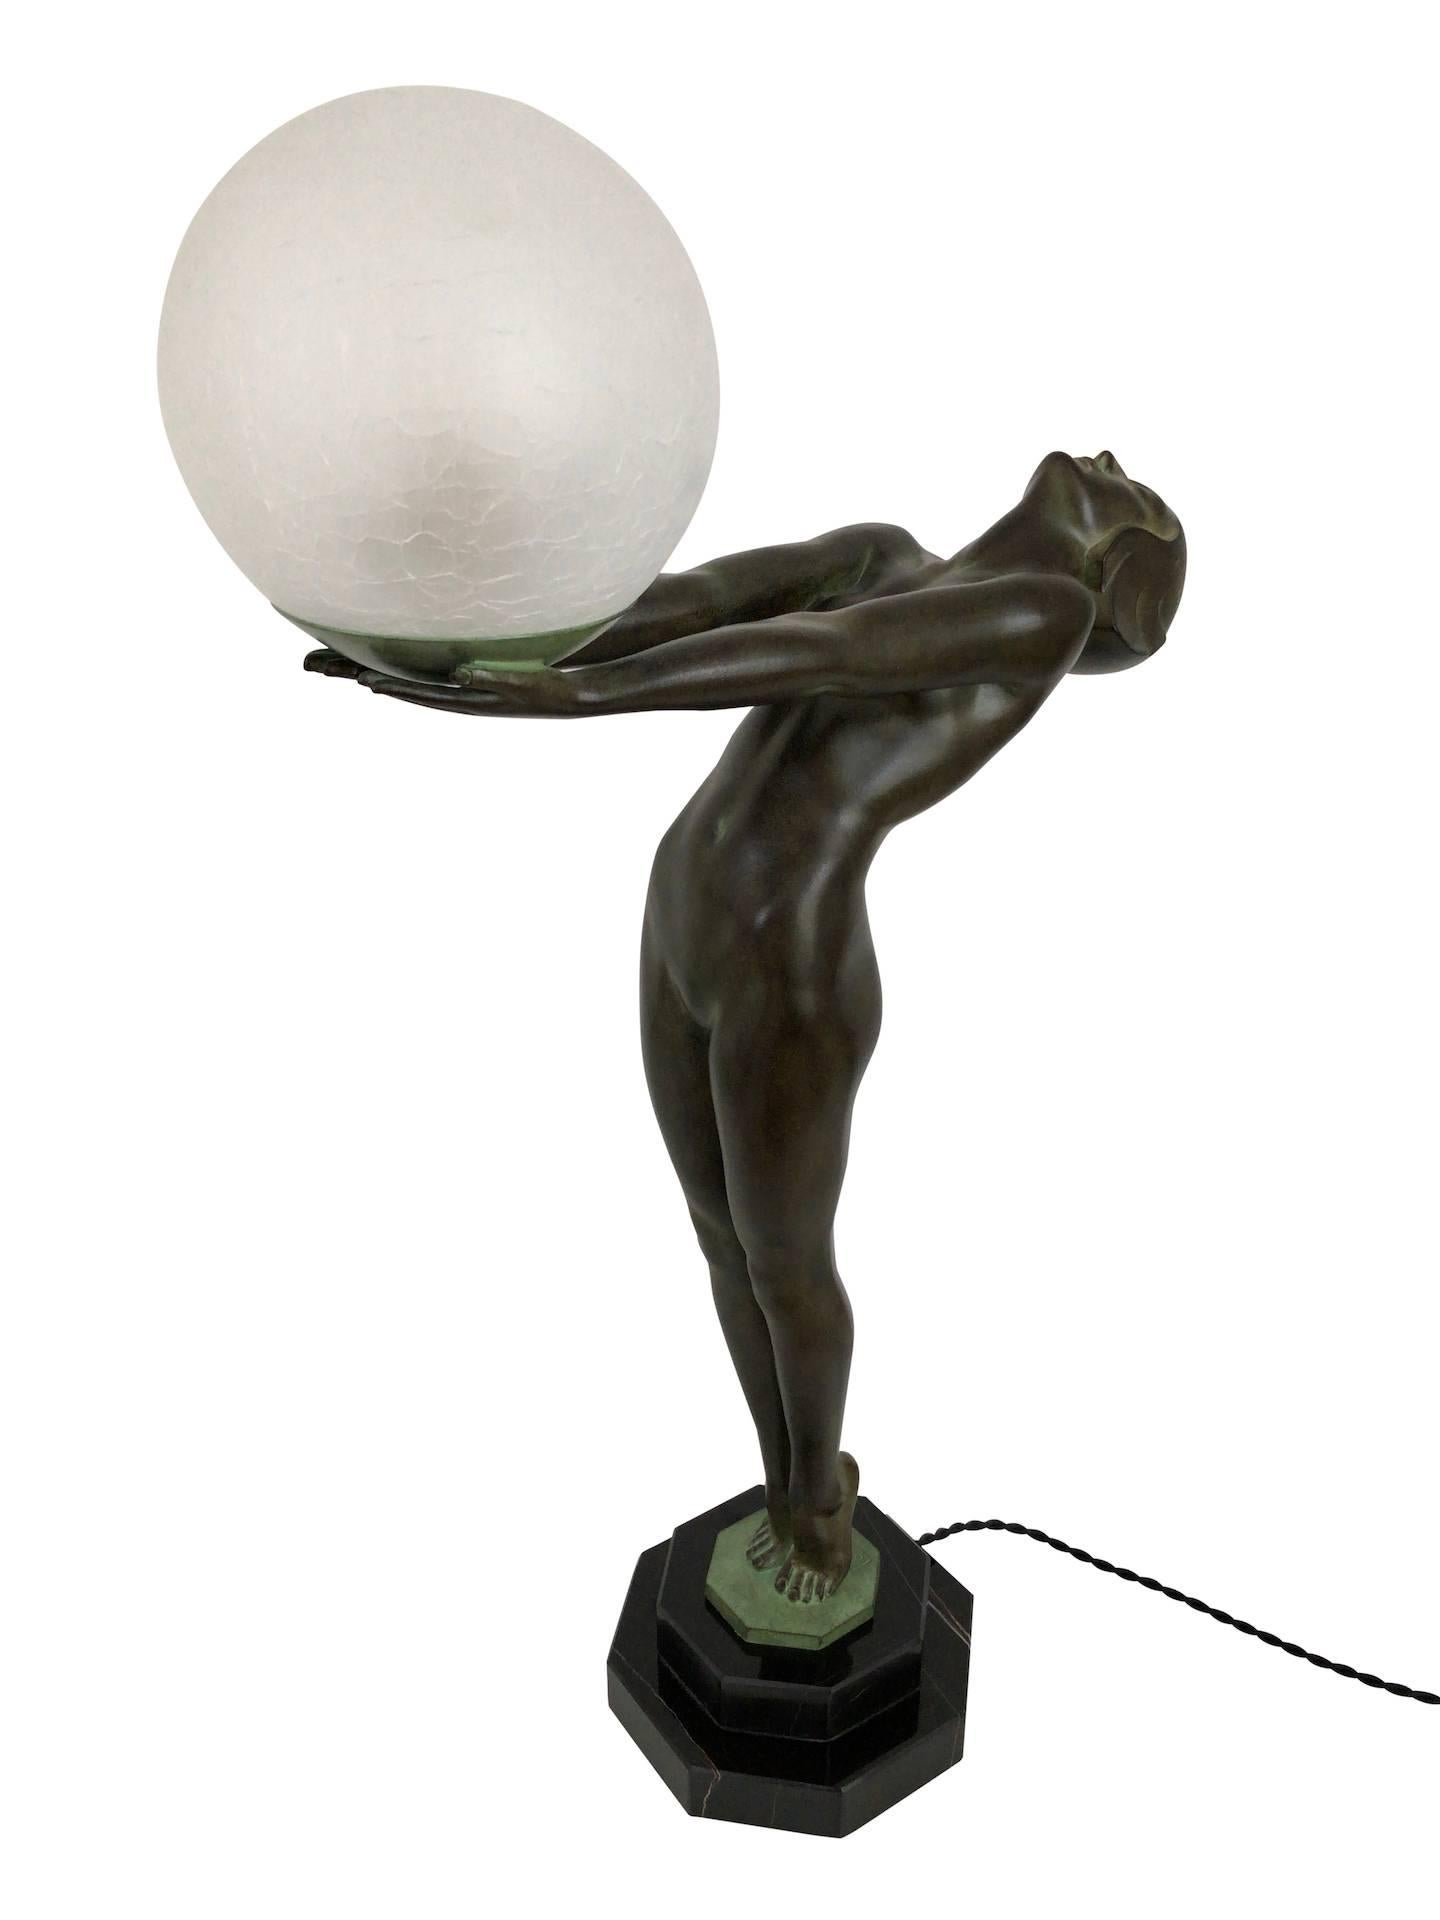 Lumina
Famous, very decorative Art Deco object. 
A little smaller than the famous Clarté 
Designed in France during the roaring 1920s by “Max Le Verrier” (1891-1973) 
Original Max Le Verrier, signed 
Art Deco style, France

Lighted sculpture